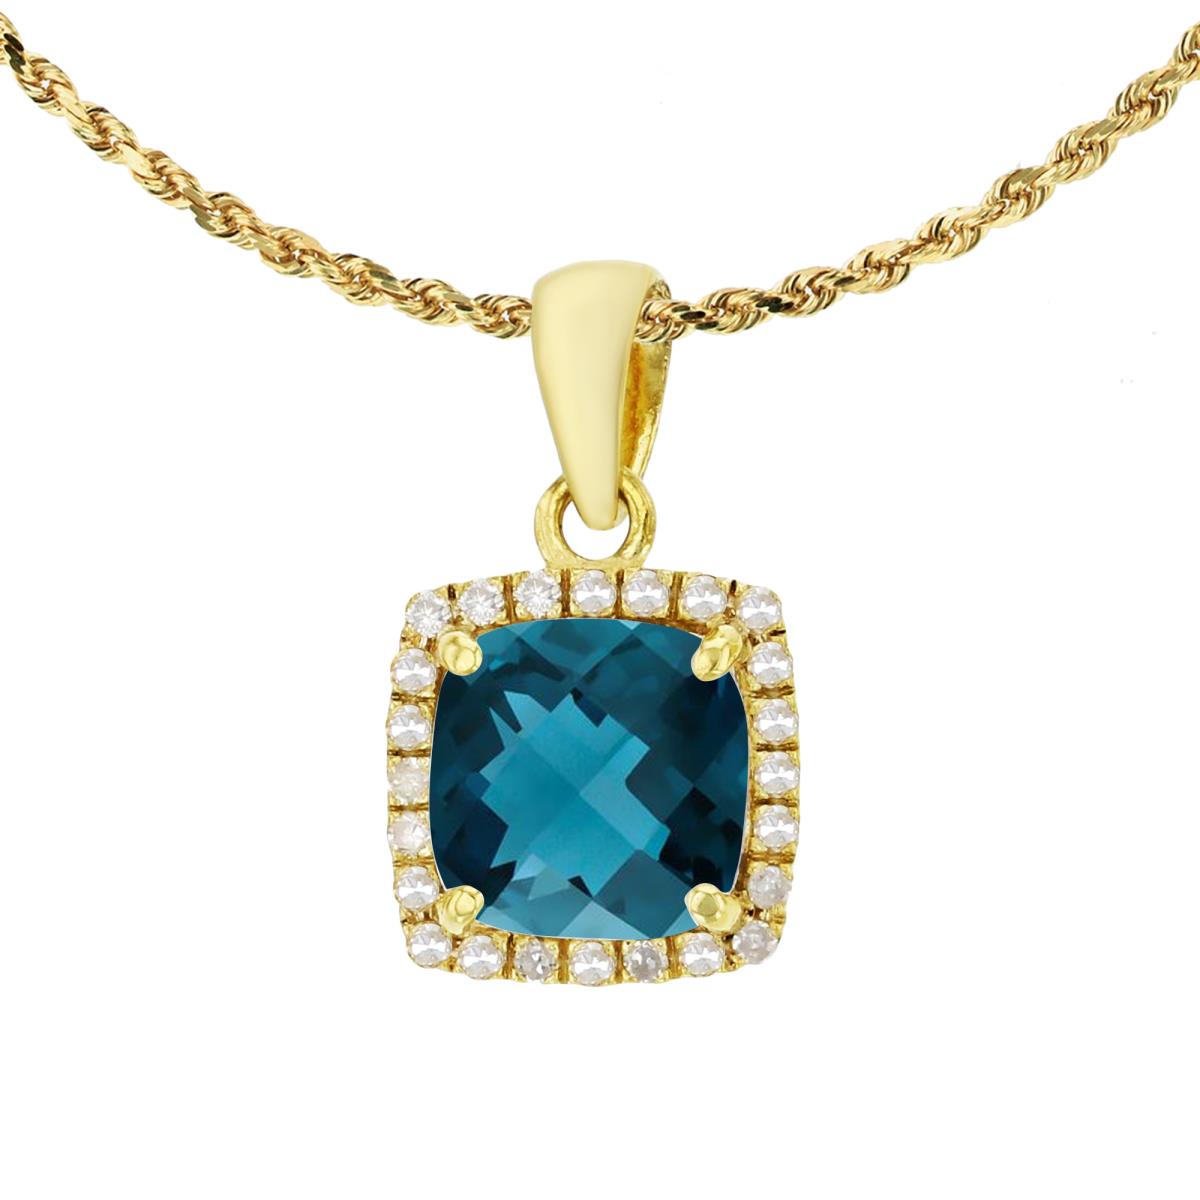 14K Yellow Gold 7mm Cushion London Blue Topaz & 0.12 CTTW Diamond Halo 18" Rope Chain Necklace